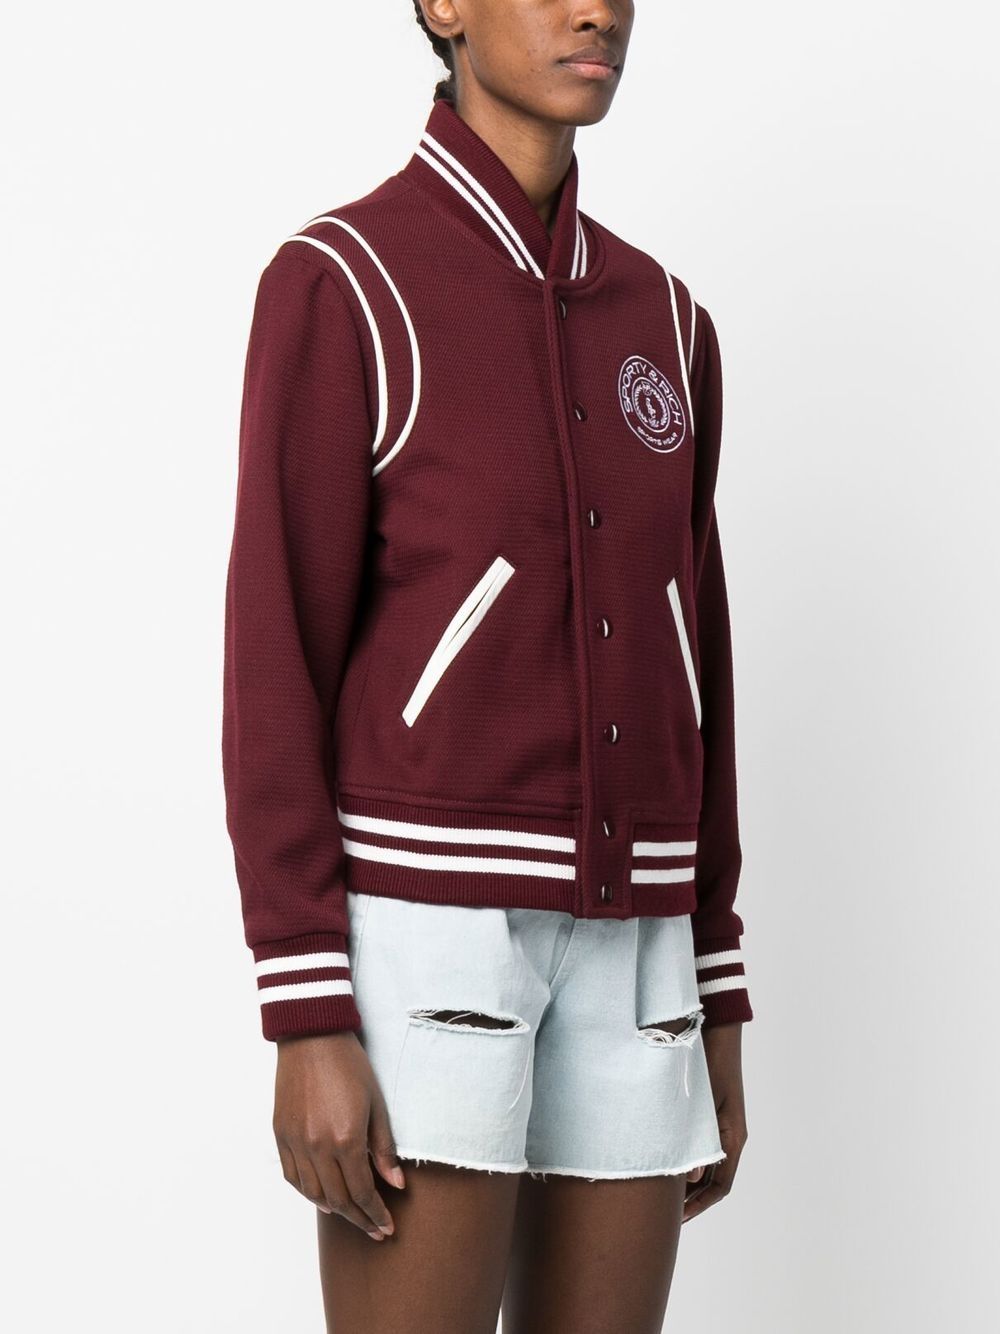 Sporty And Rich Monaco Varsity Jacket In Red | ModeSens